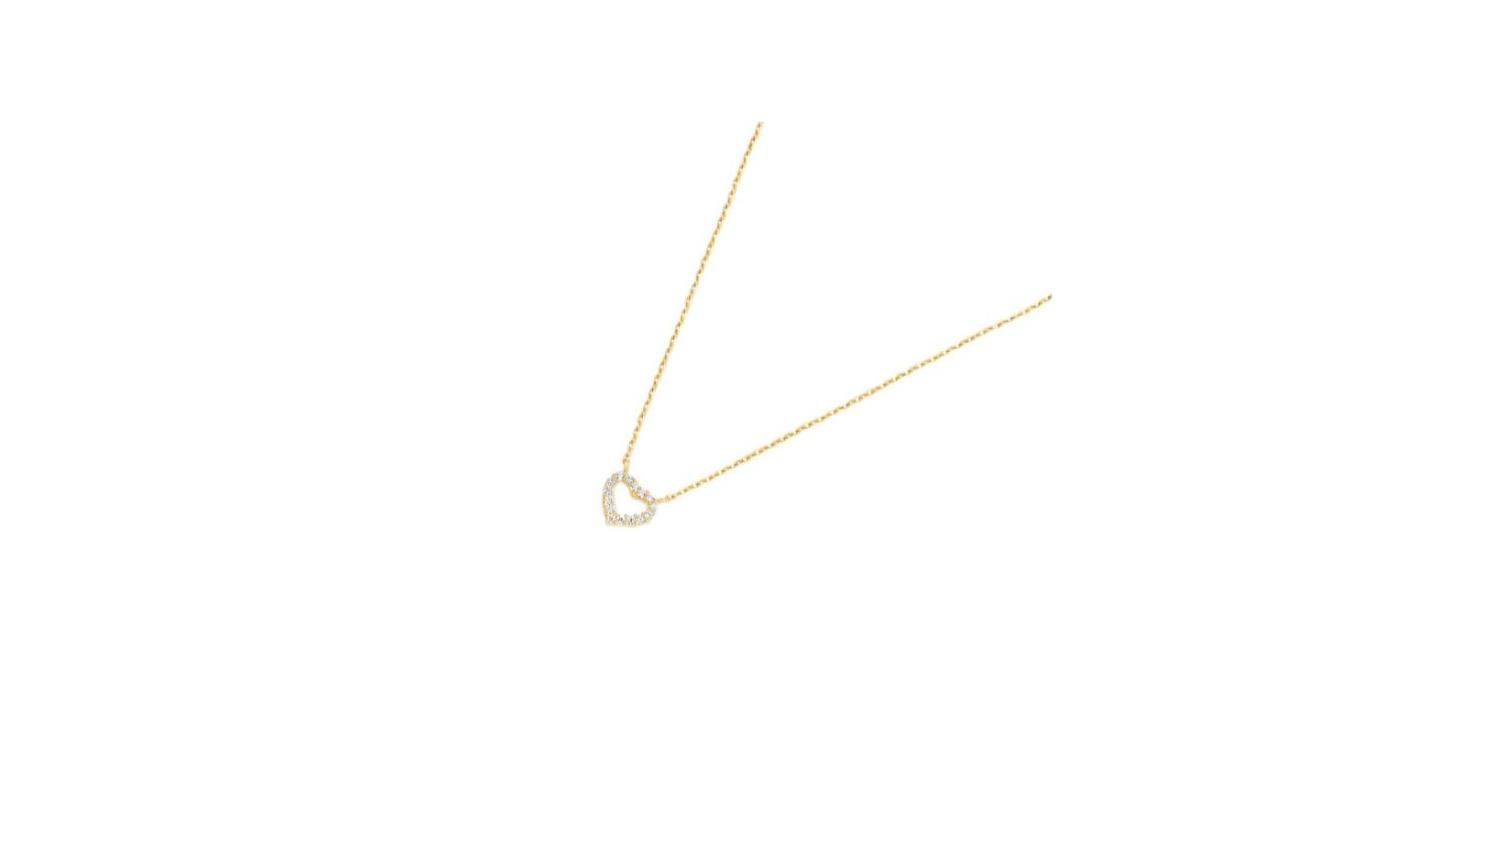 Round Cut 14k Solid Gold Heart Pendant Necklace, Tiny Heart Charm Gold Chain Necklace. For Sale